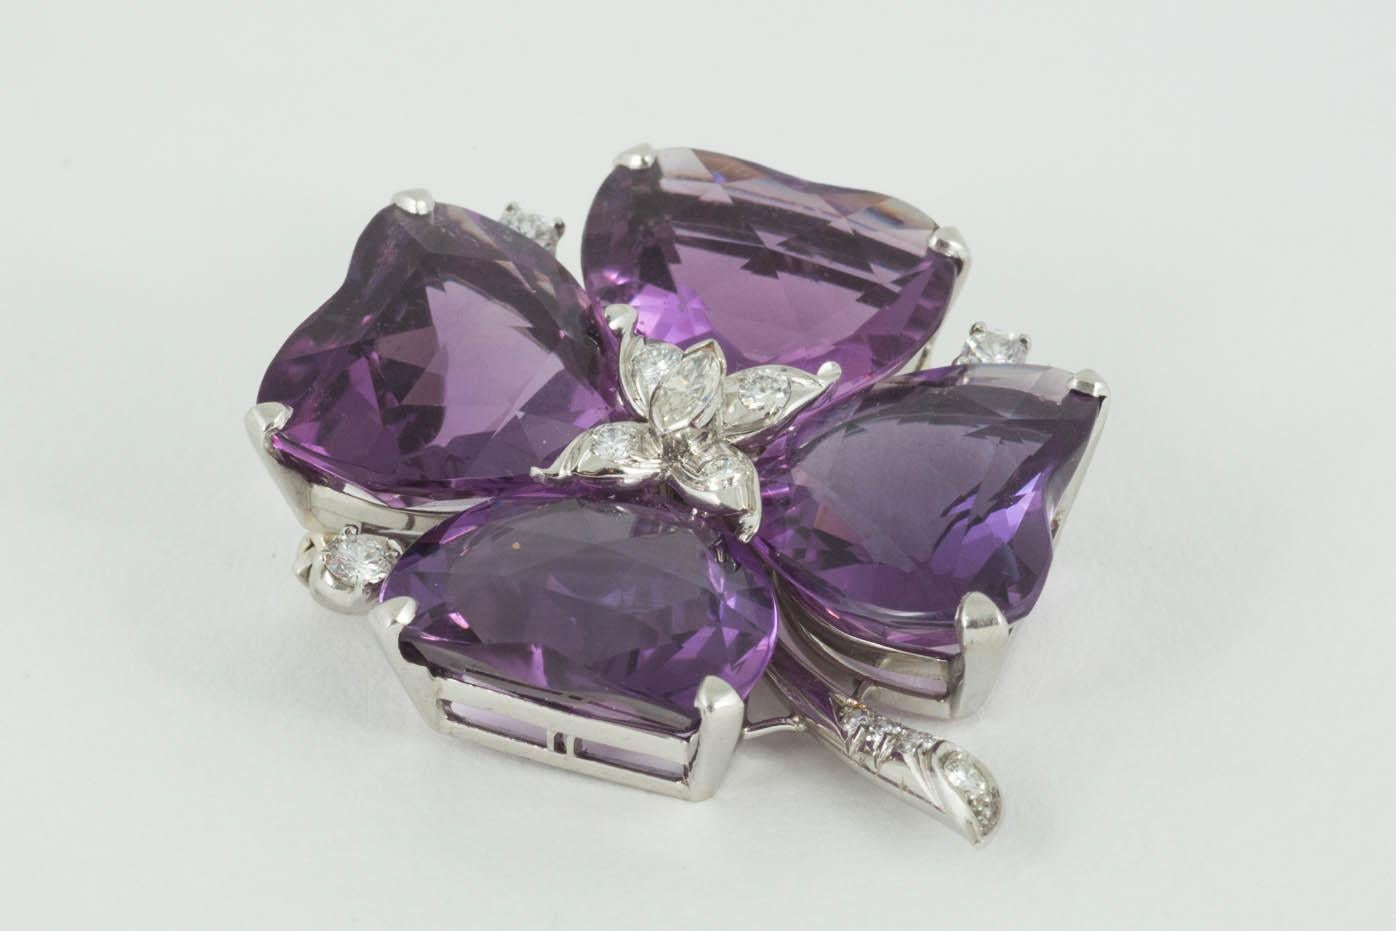 A high quality four leaf clover brooch set with rose cut Amethysts and diamond collets between each stone and the stem. The centre is set with a marquise shaped diamond and four further brilliant cut diamonds. Platinum mark and numbered